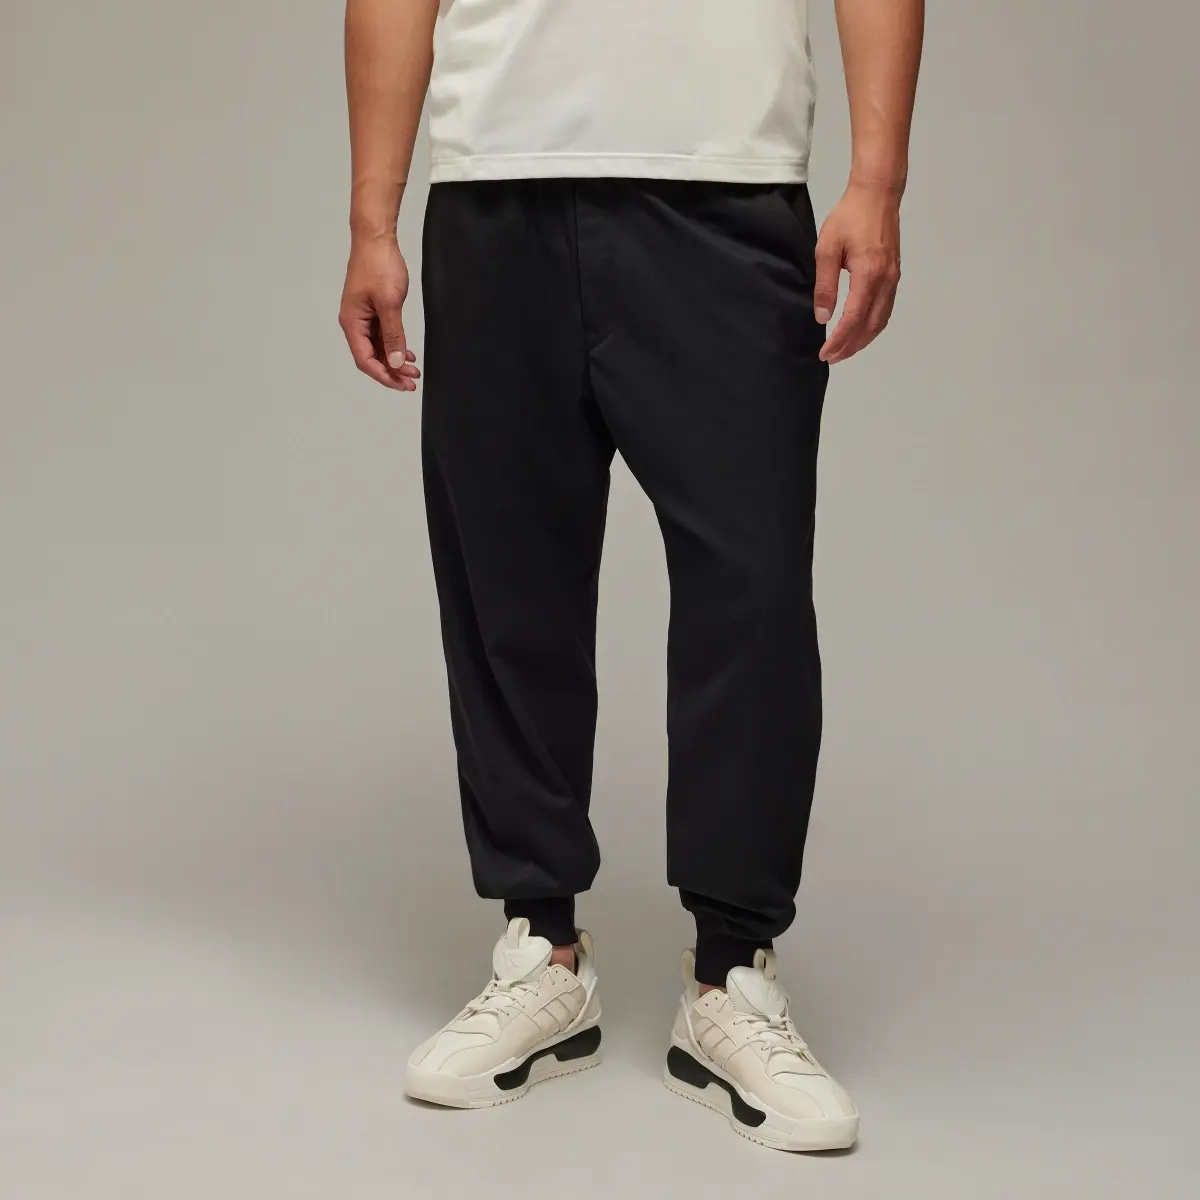 Adidas Y-3 Refined Woven Cuffed Tracksuit Bottoms. 1